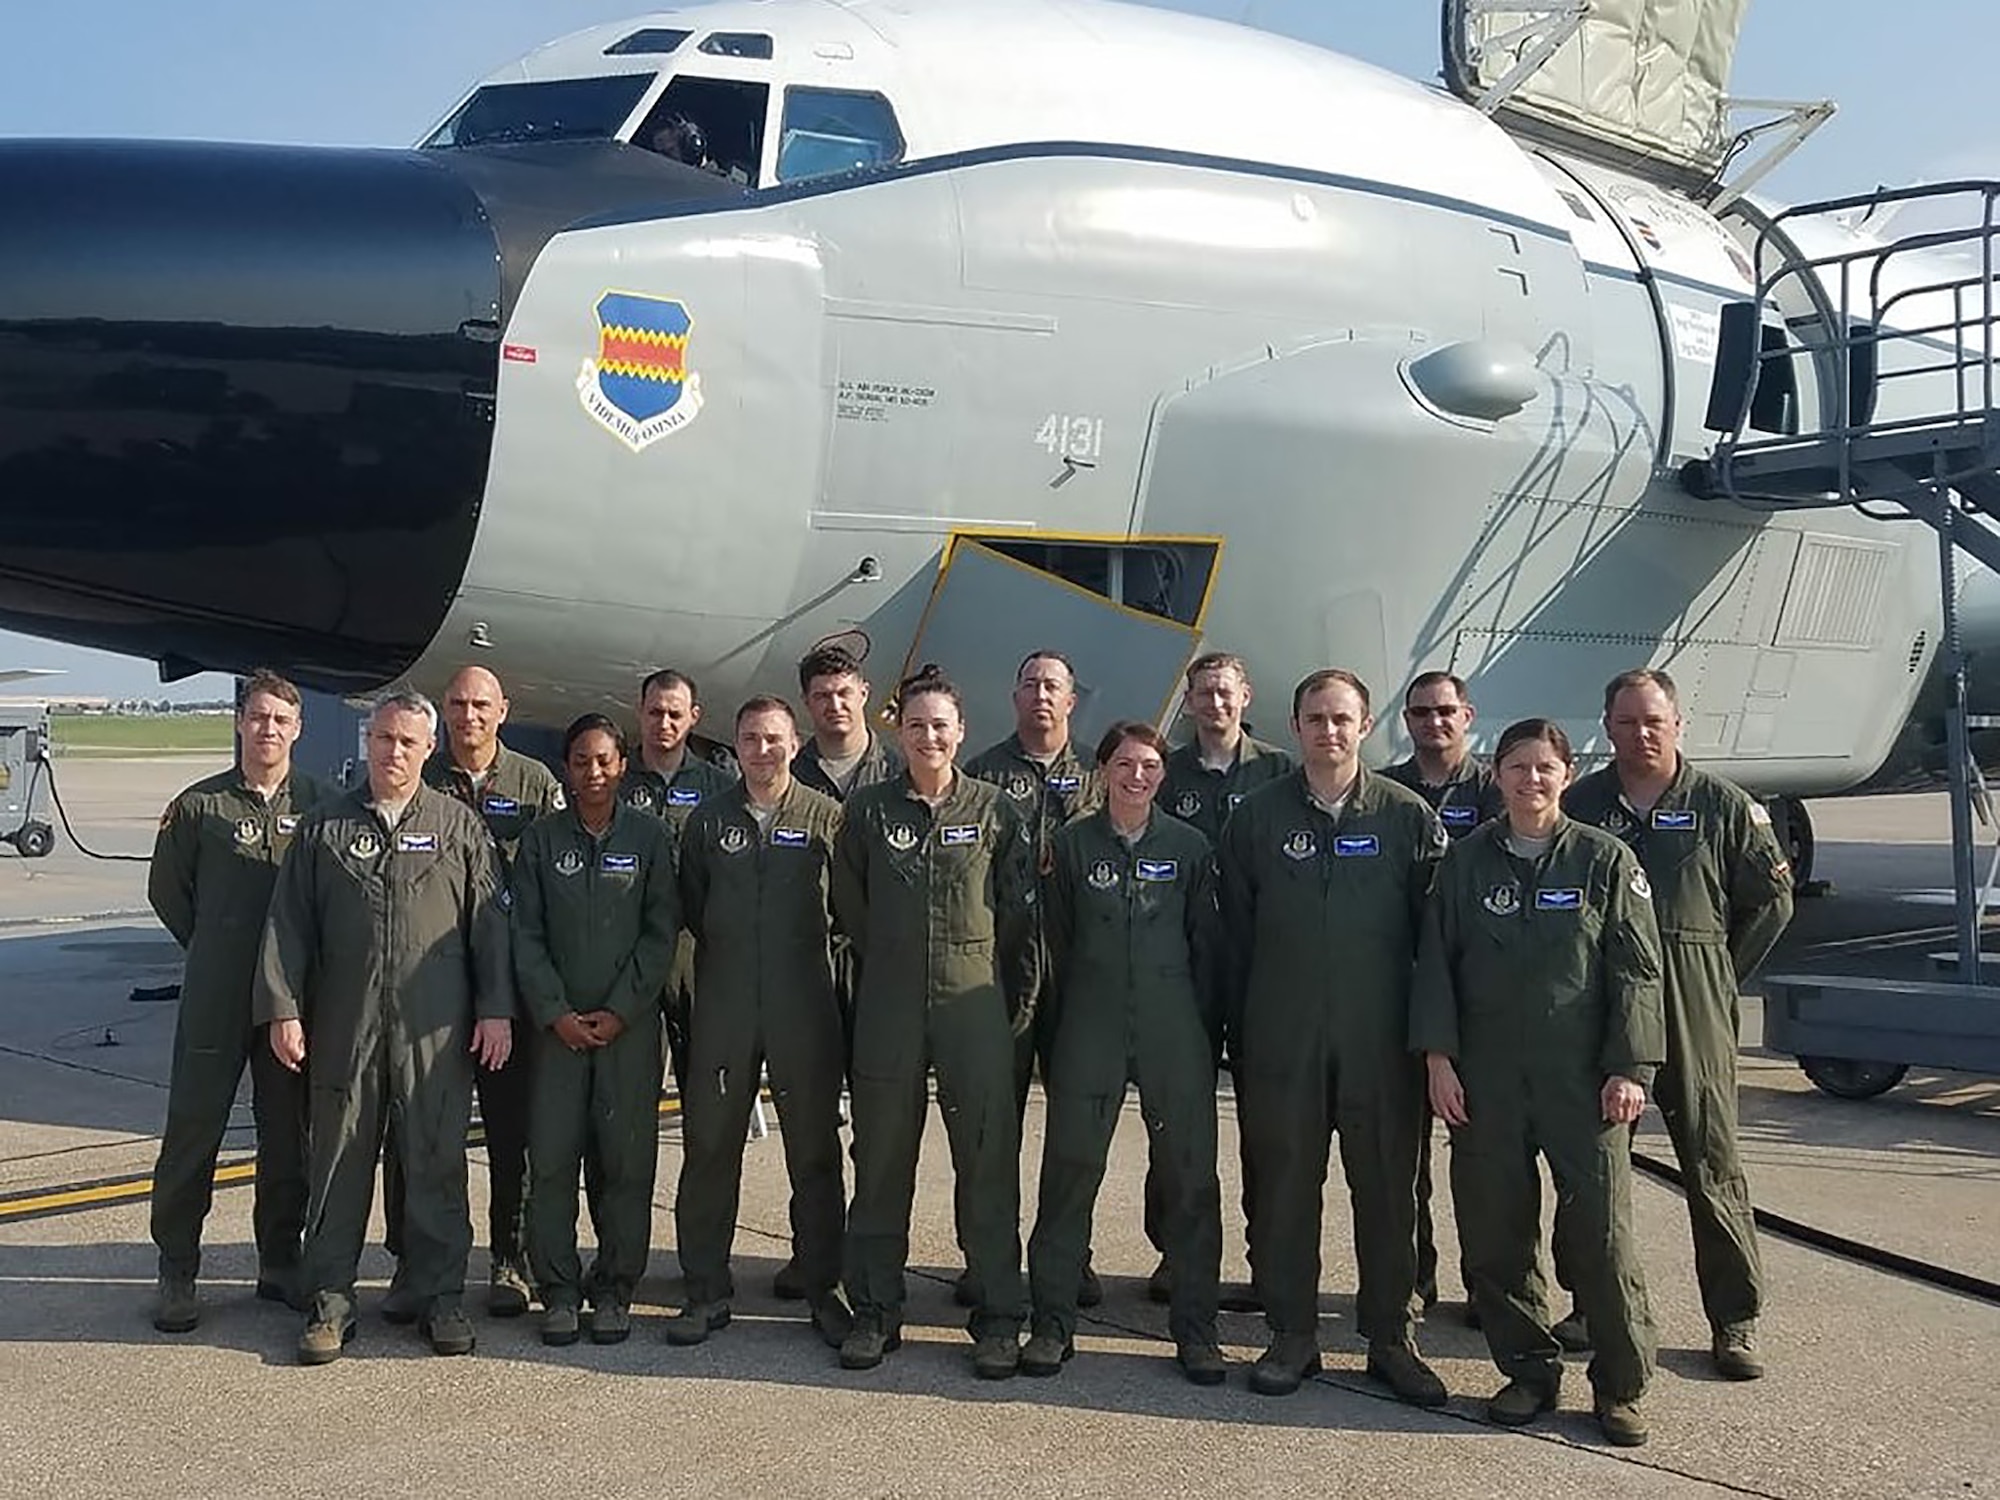 Members of the 655th Intelligence, Surveillance and
Reconnaissance Group 49th Intelligence Squadron pose outside an RC-135V/W Rivet Joint reconnaissance aircraft during a historic training mission at Offutt Air Force Base, Nebraska, August 5, 2018.